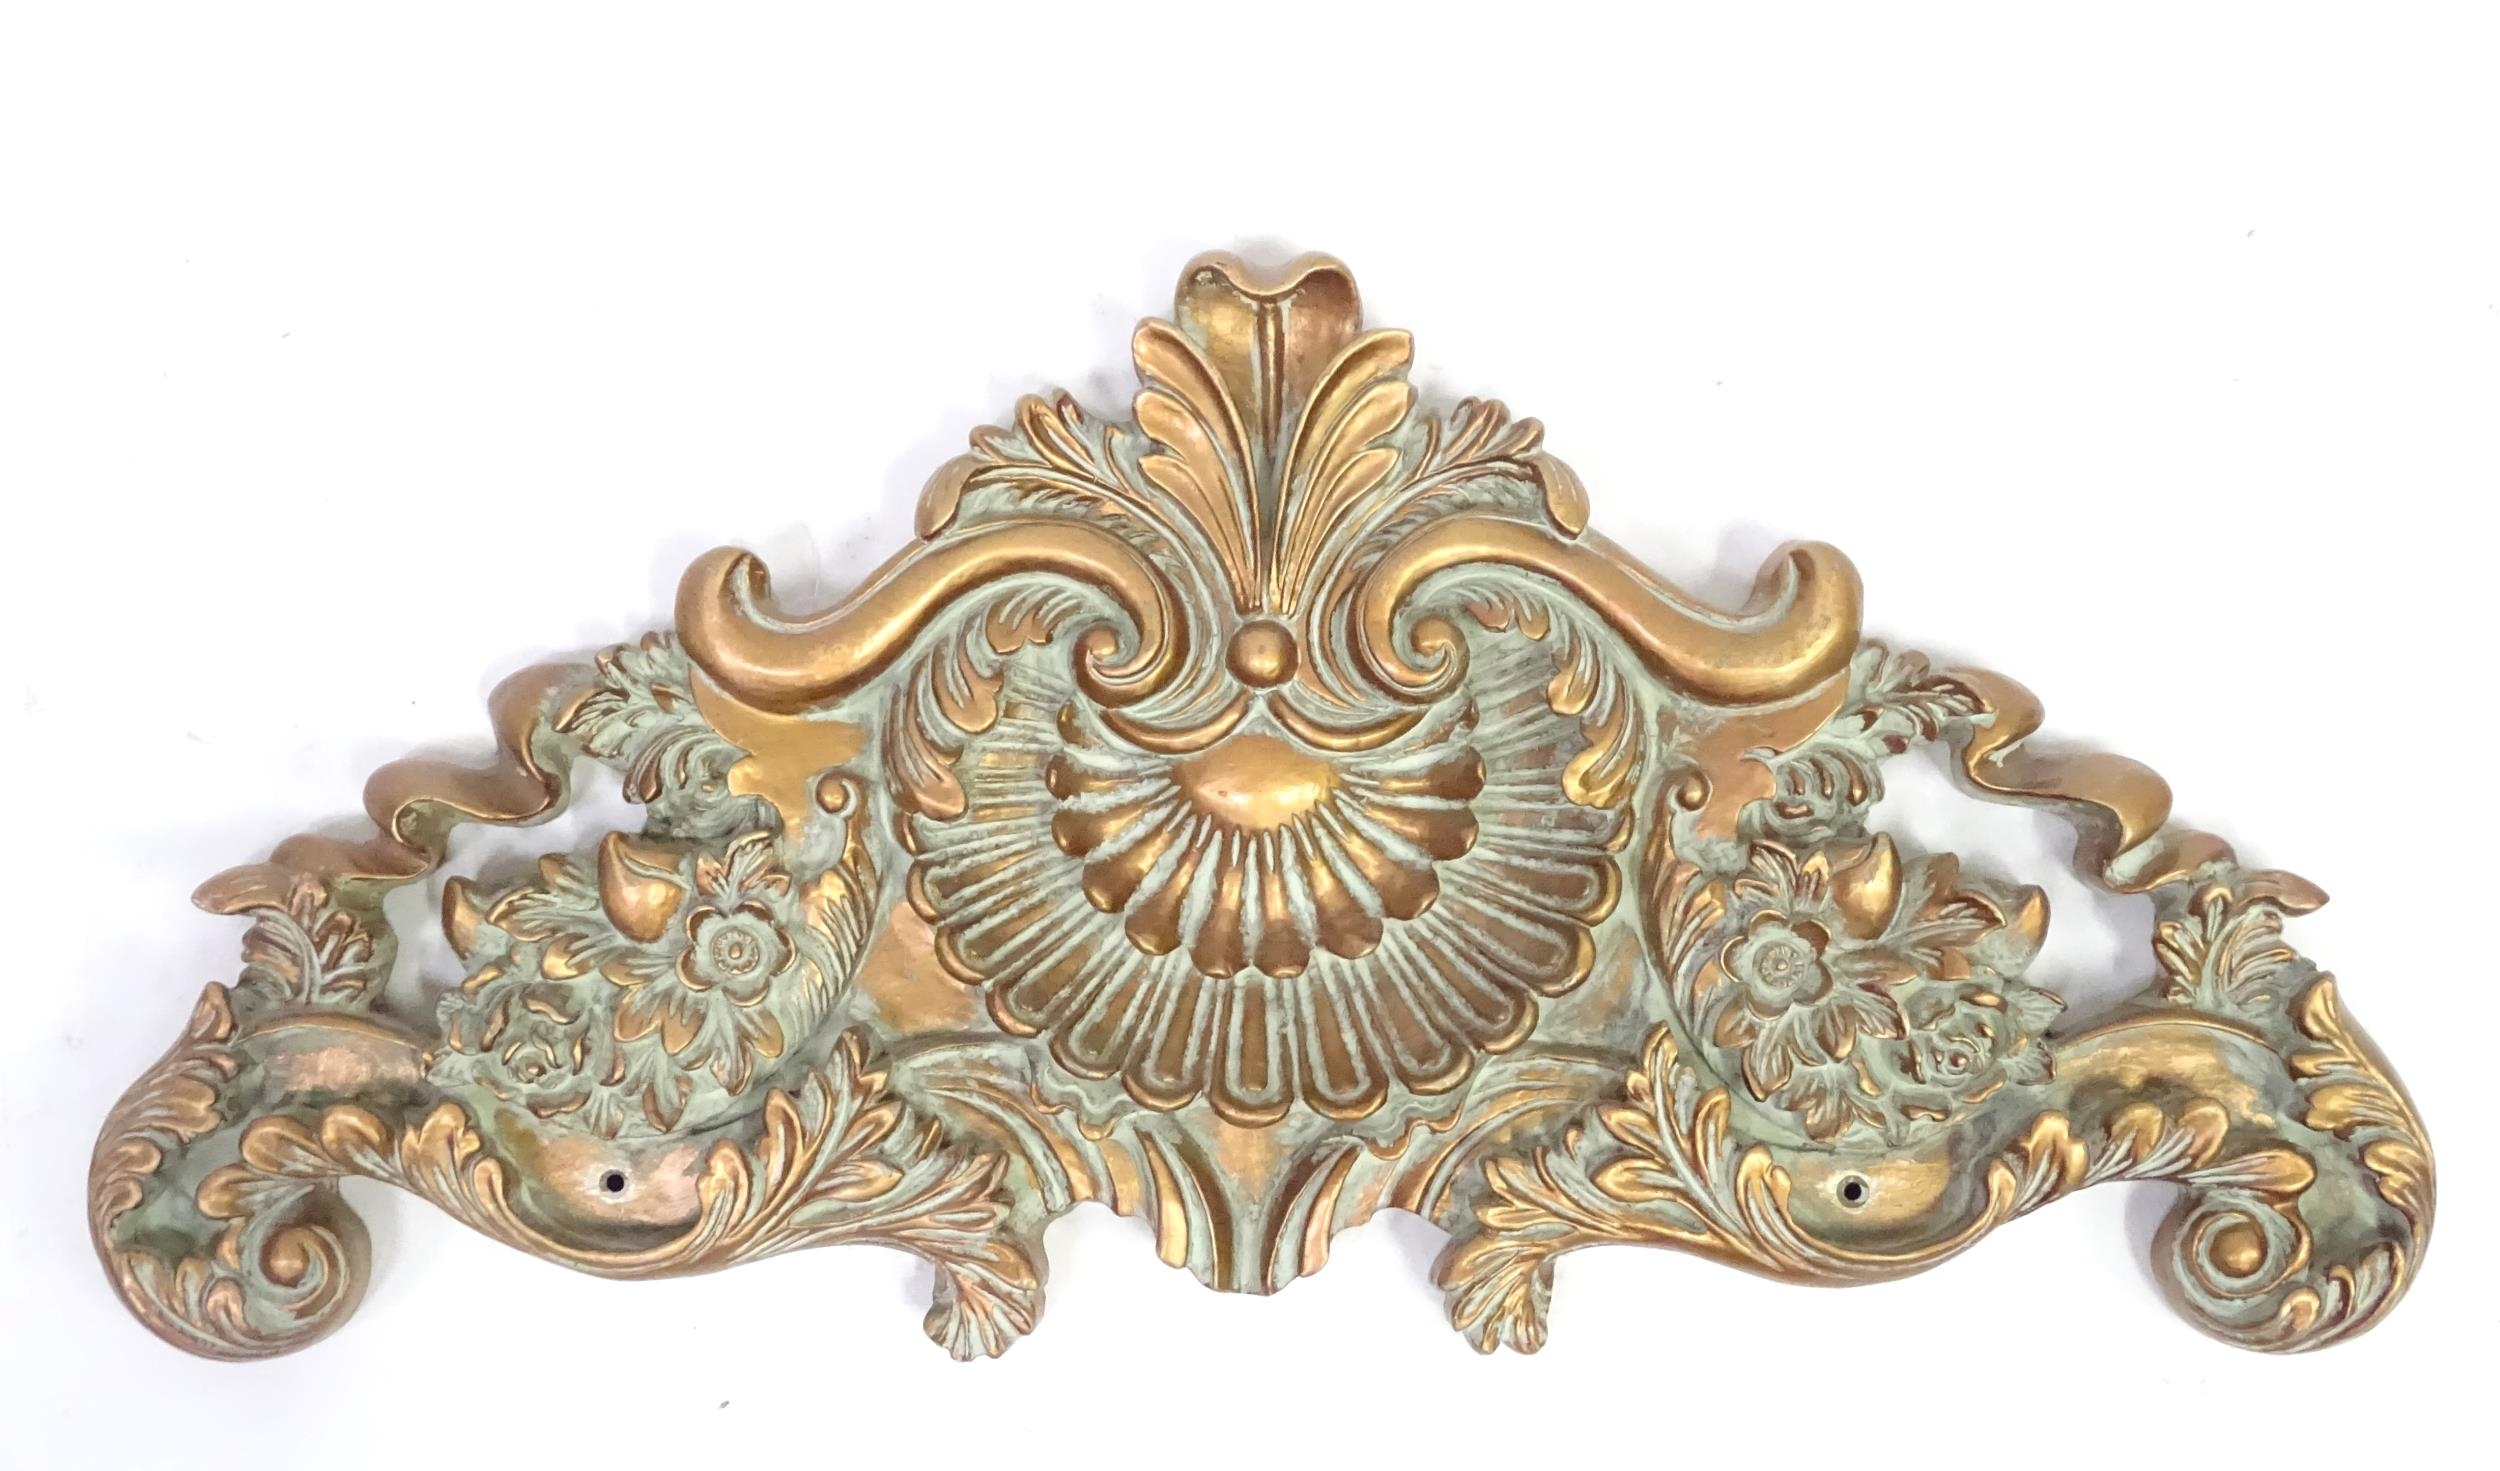 A gilt architectural / decorative moulding, with shell and floral motifs , 31" wide x 15" tall - Image 3 of 6